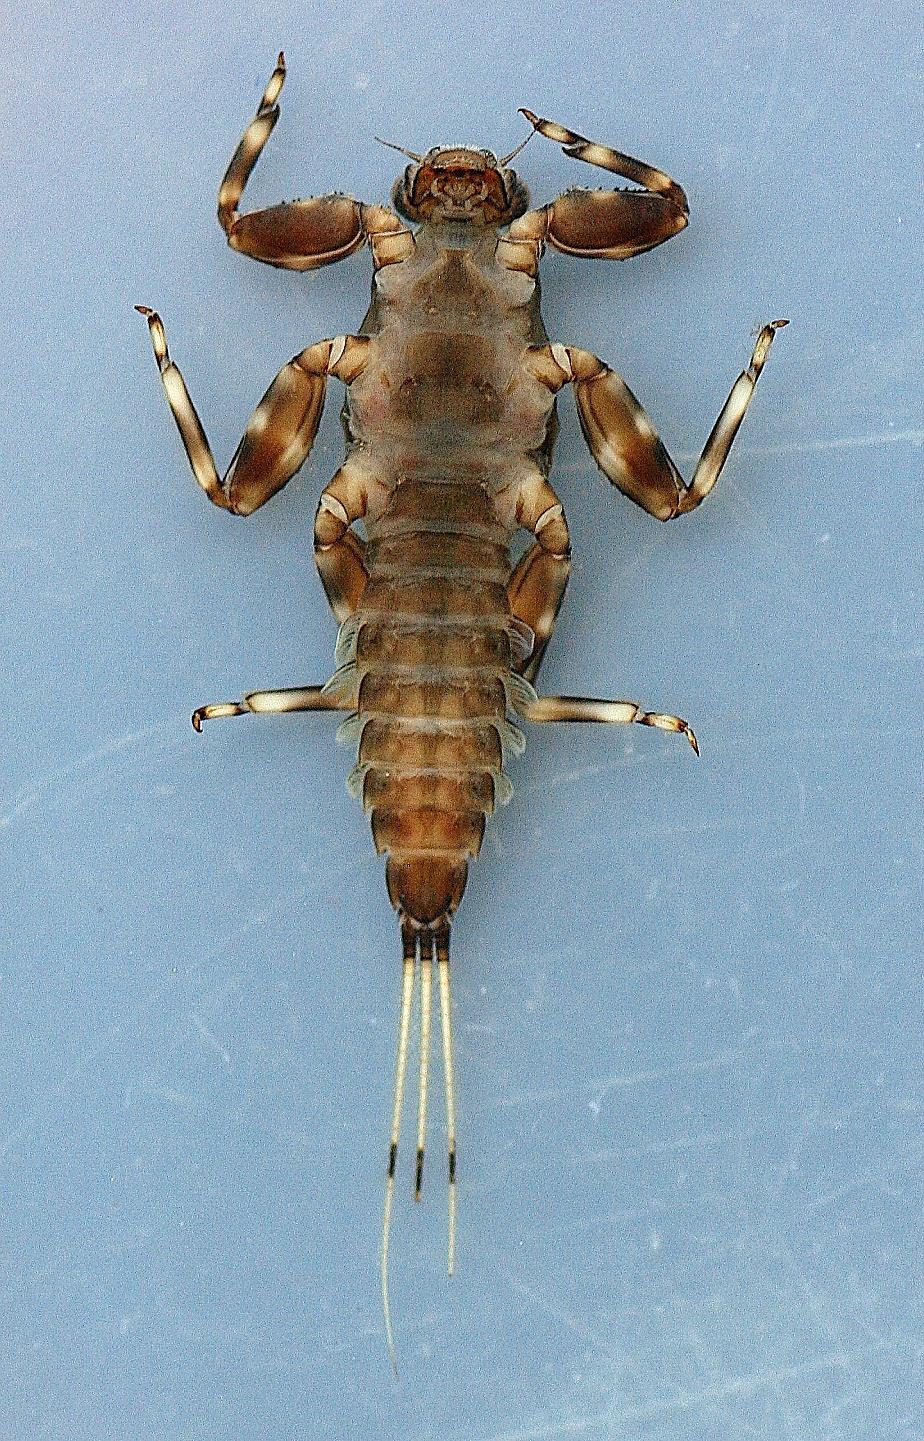 In alcohol, collected April 3, 2013. Ventral view, specimen 2.